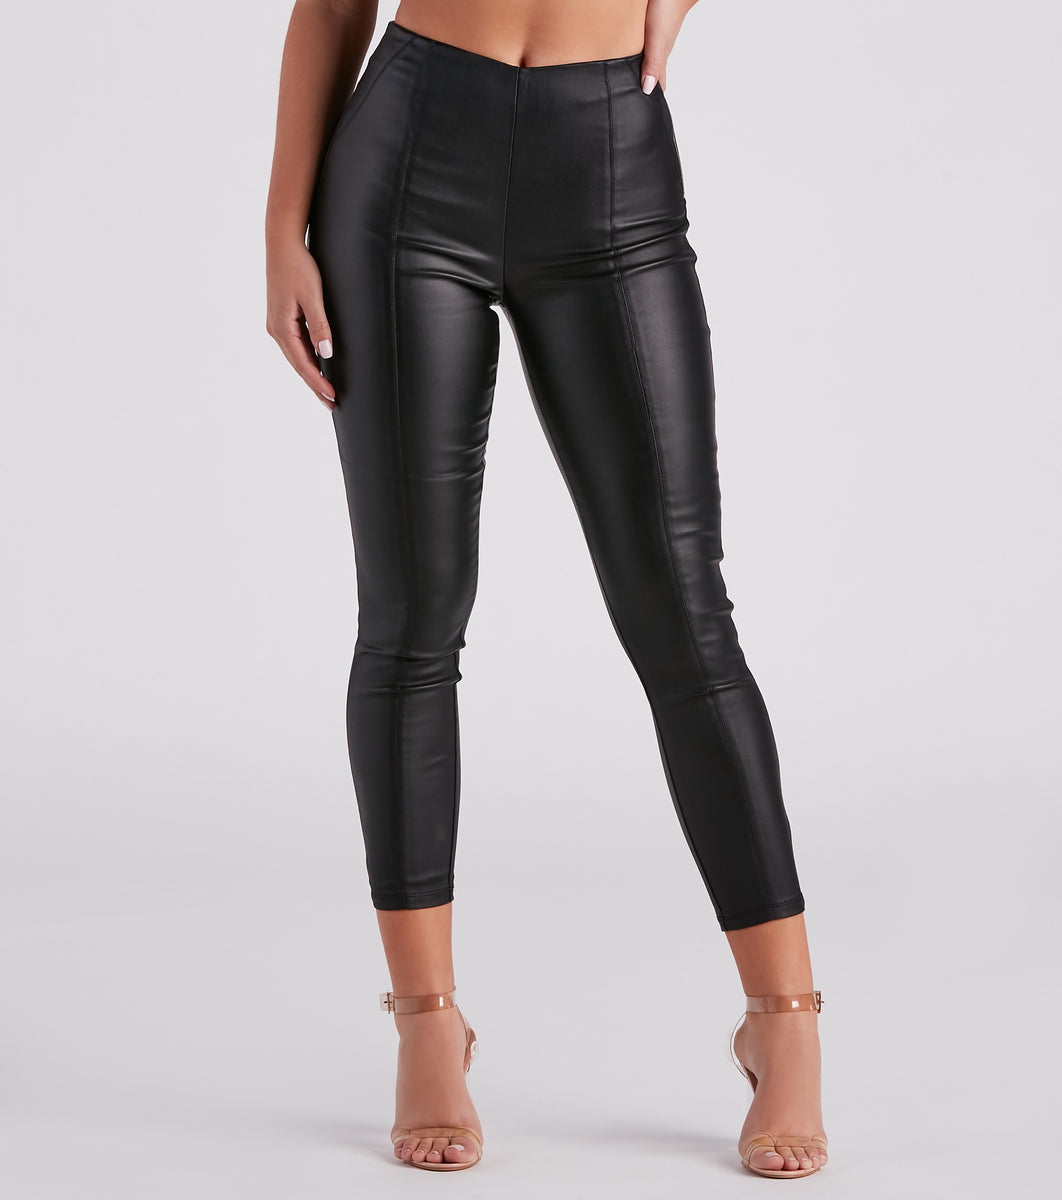 Top Spot Coated Faux Leather Skinny Pants & Windsor